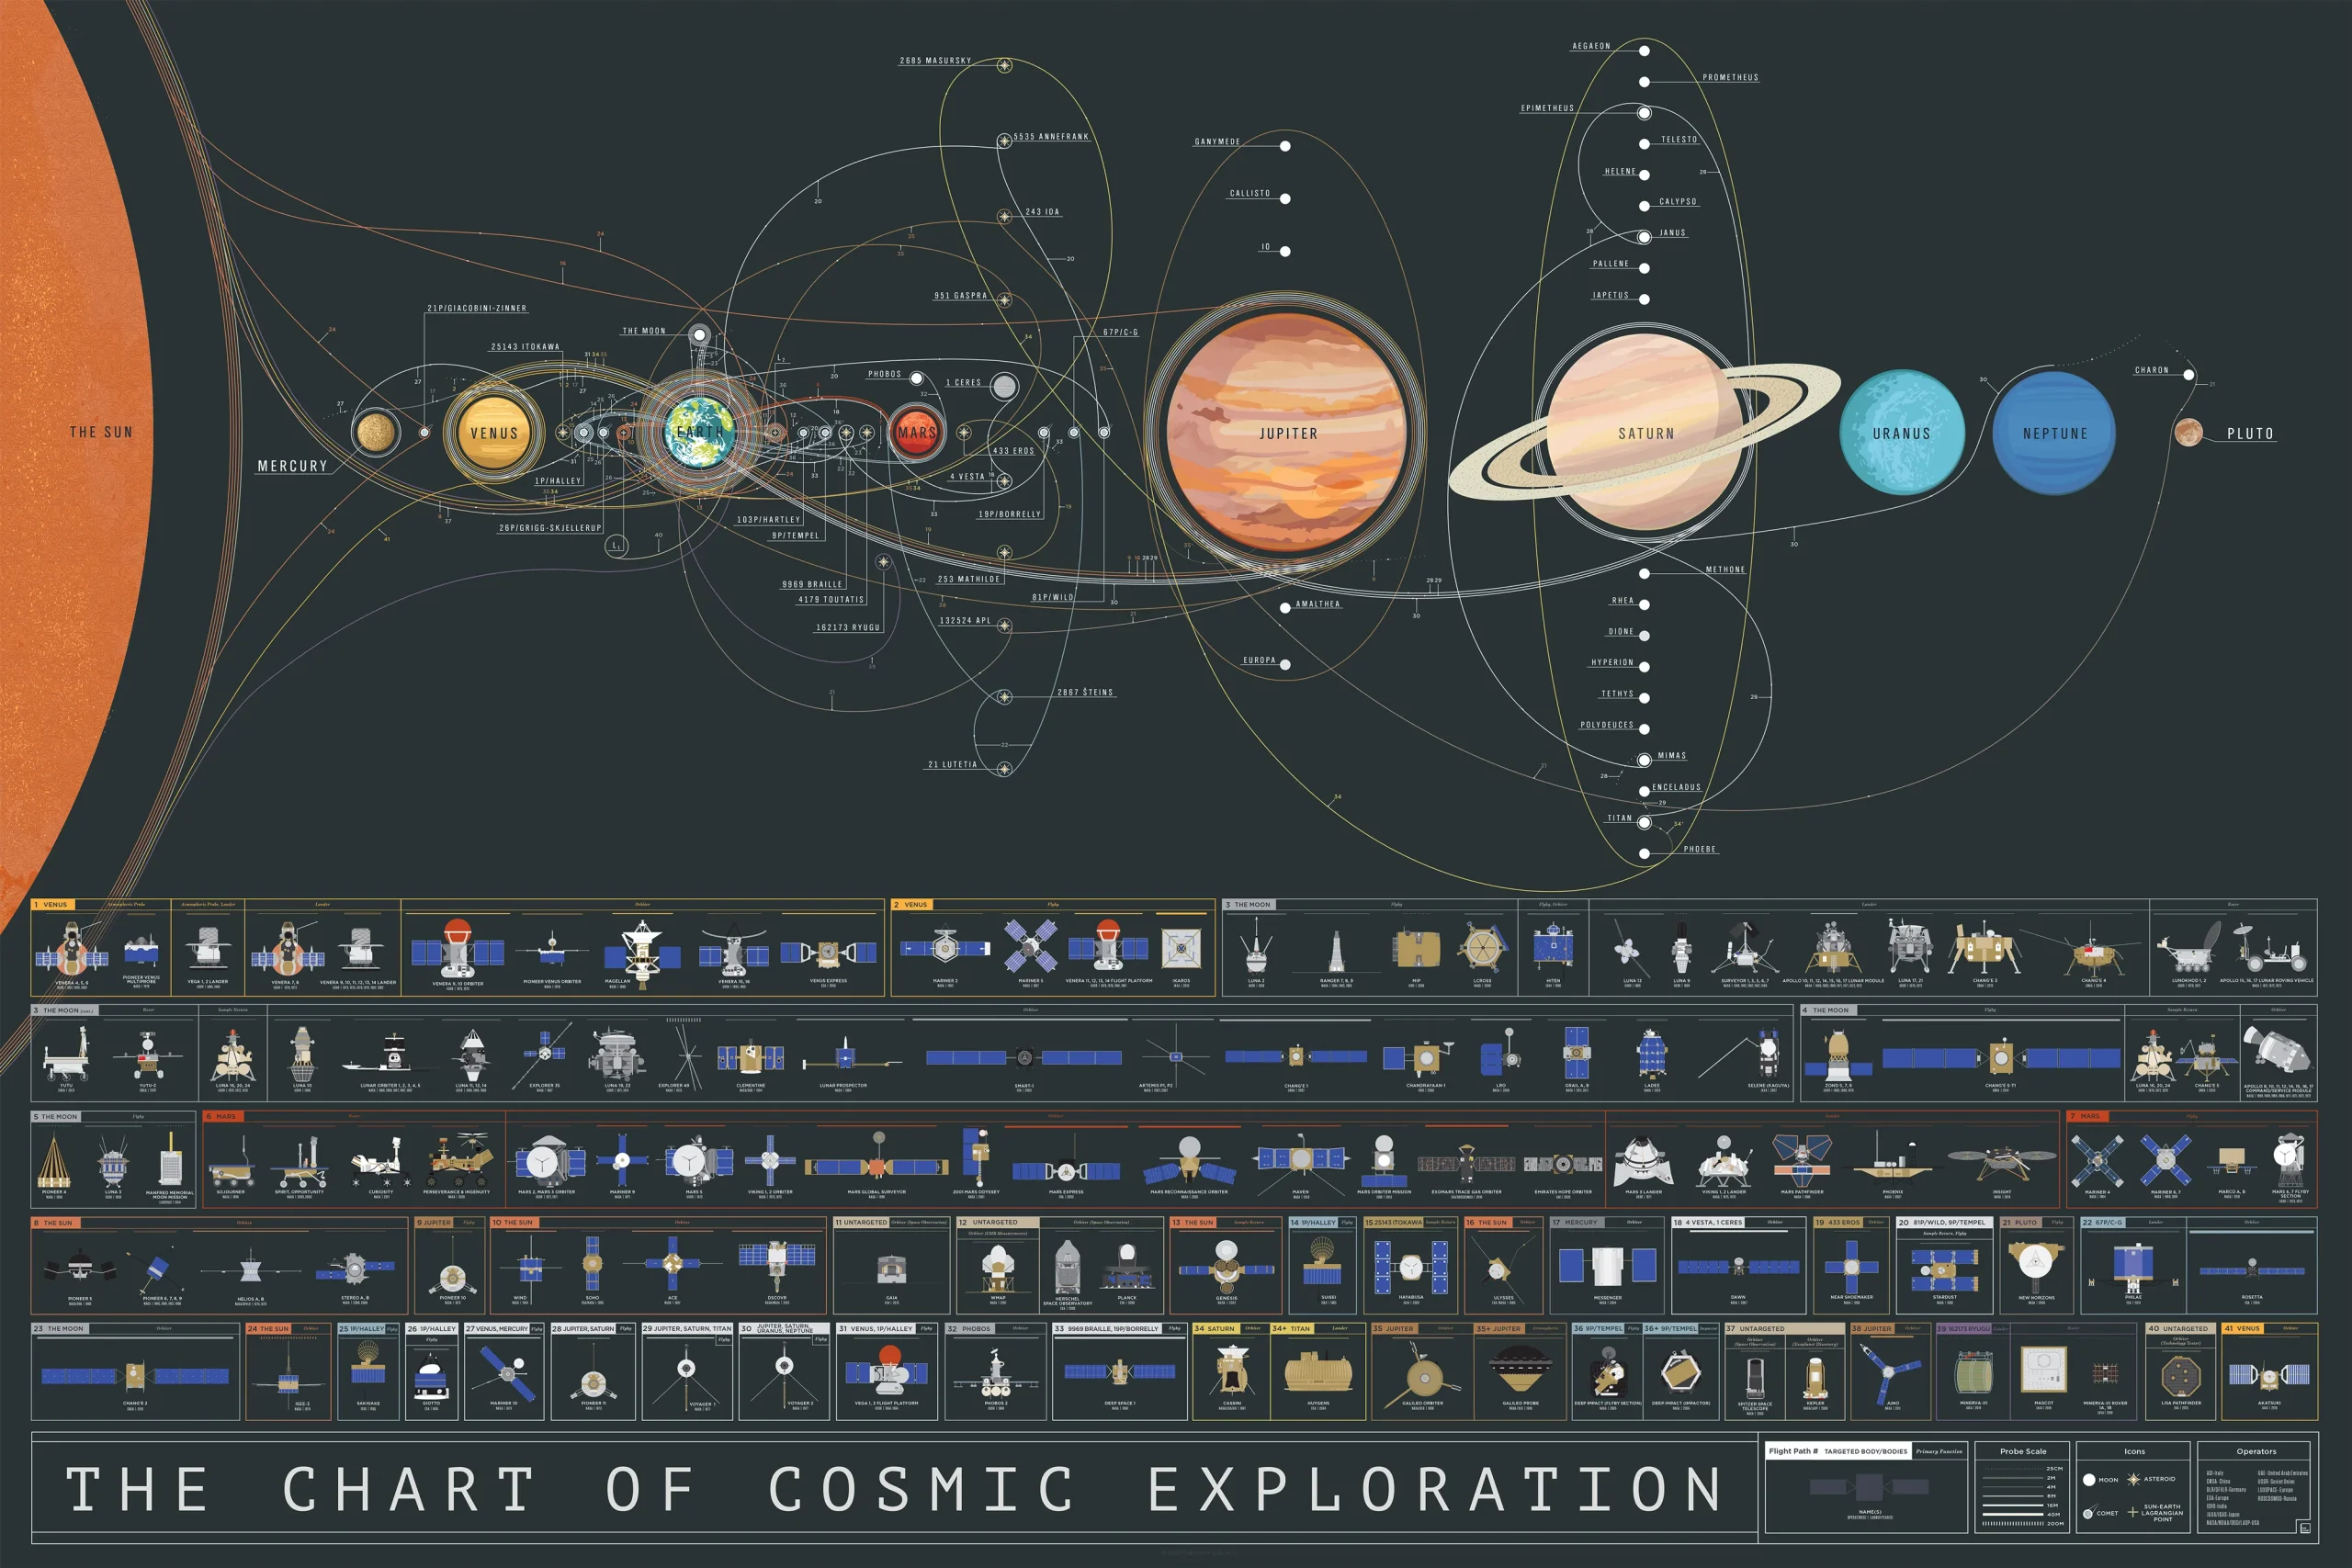 Space Exploration scaled